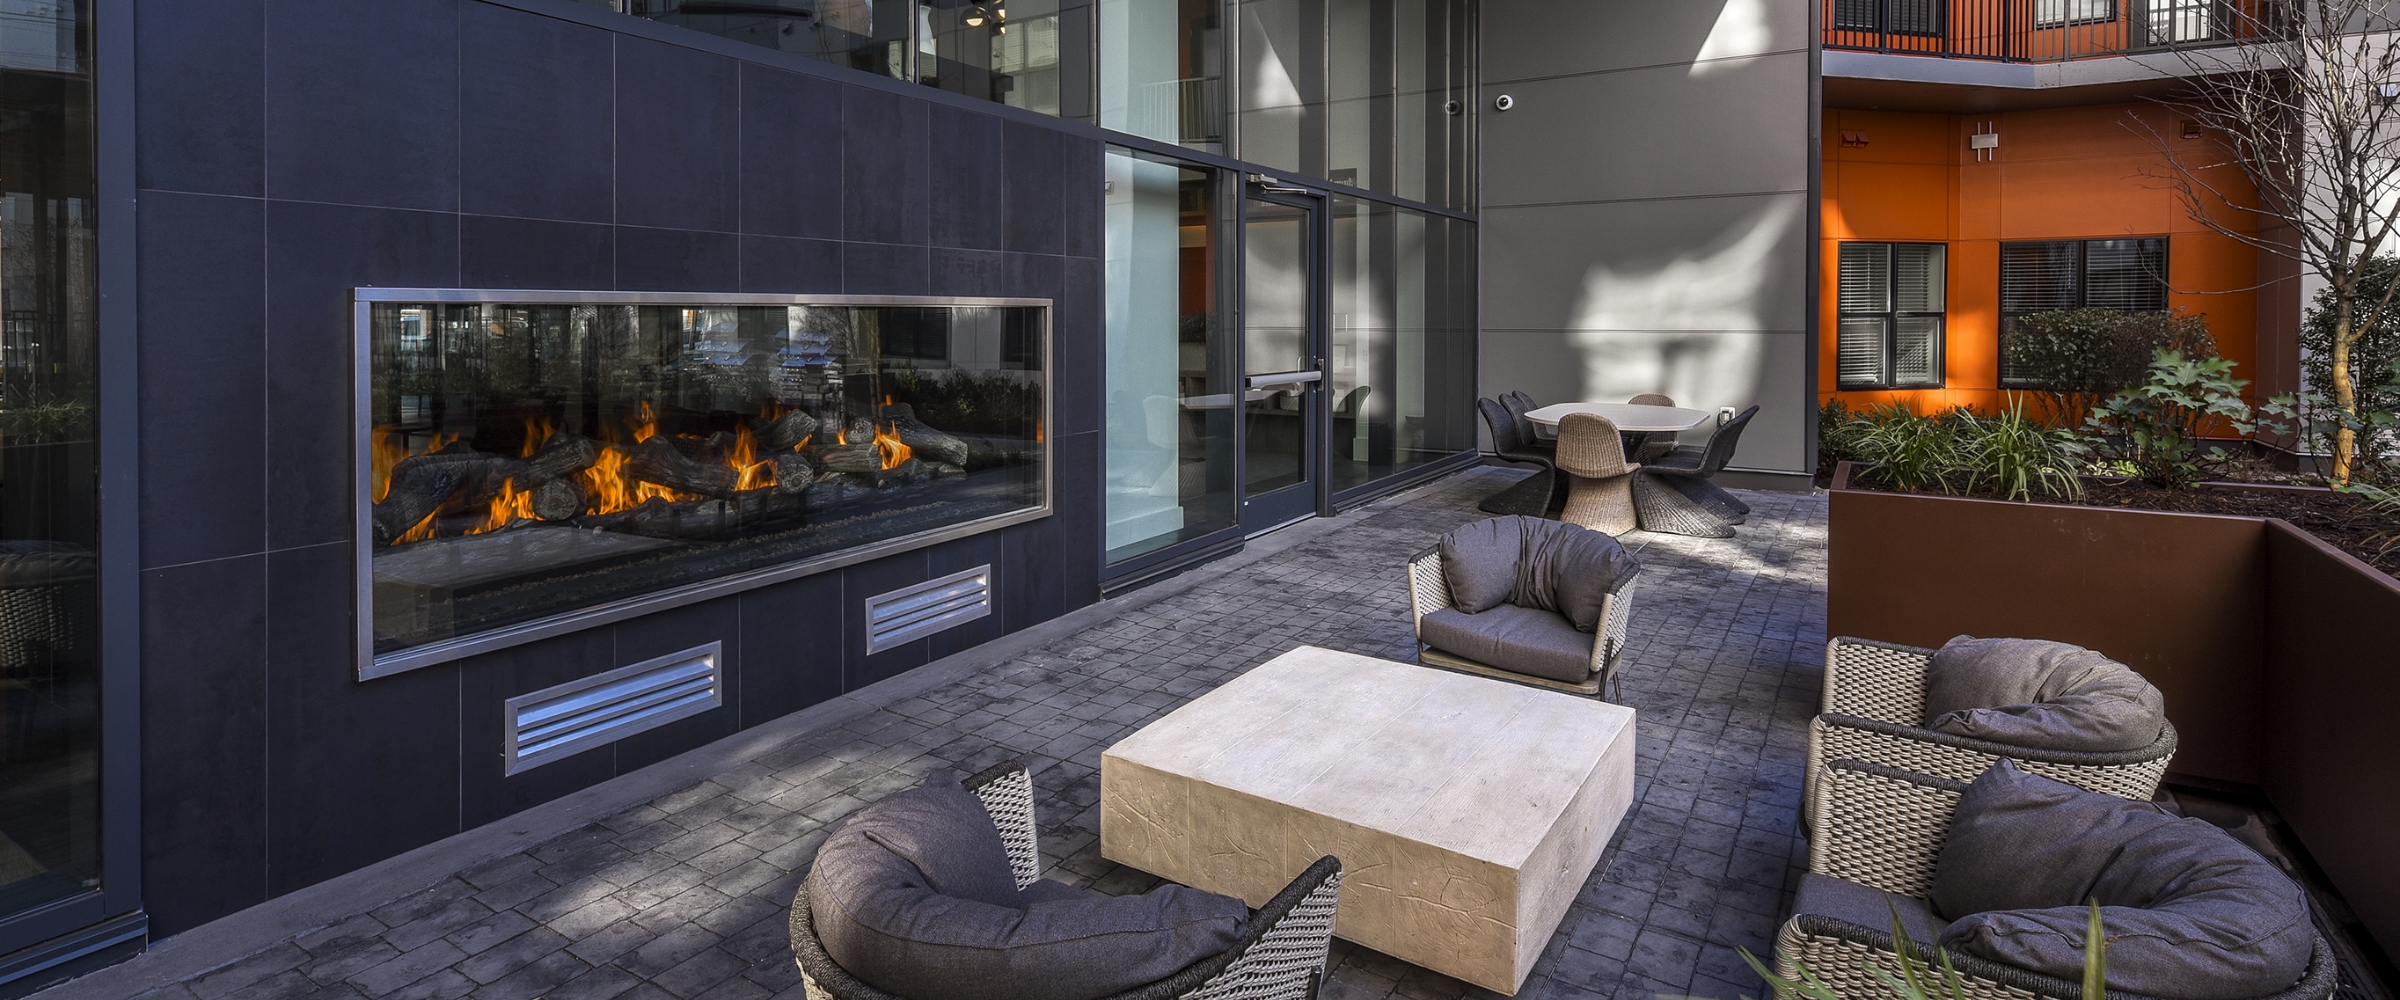 Outdoor seating with fireplace at our Locust Point apartments.